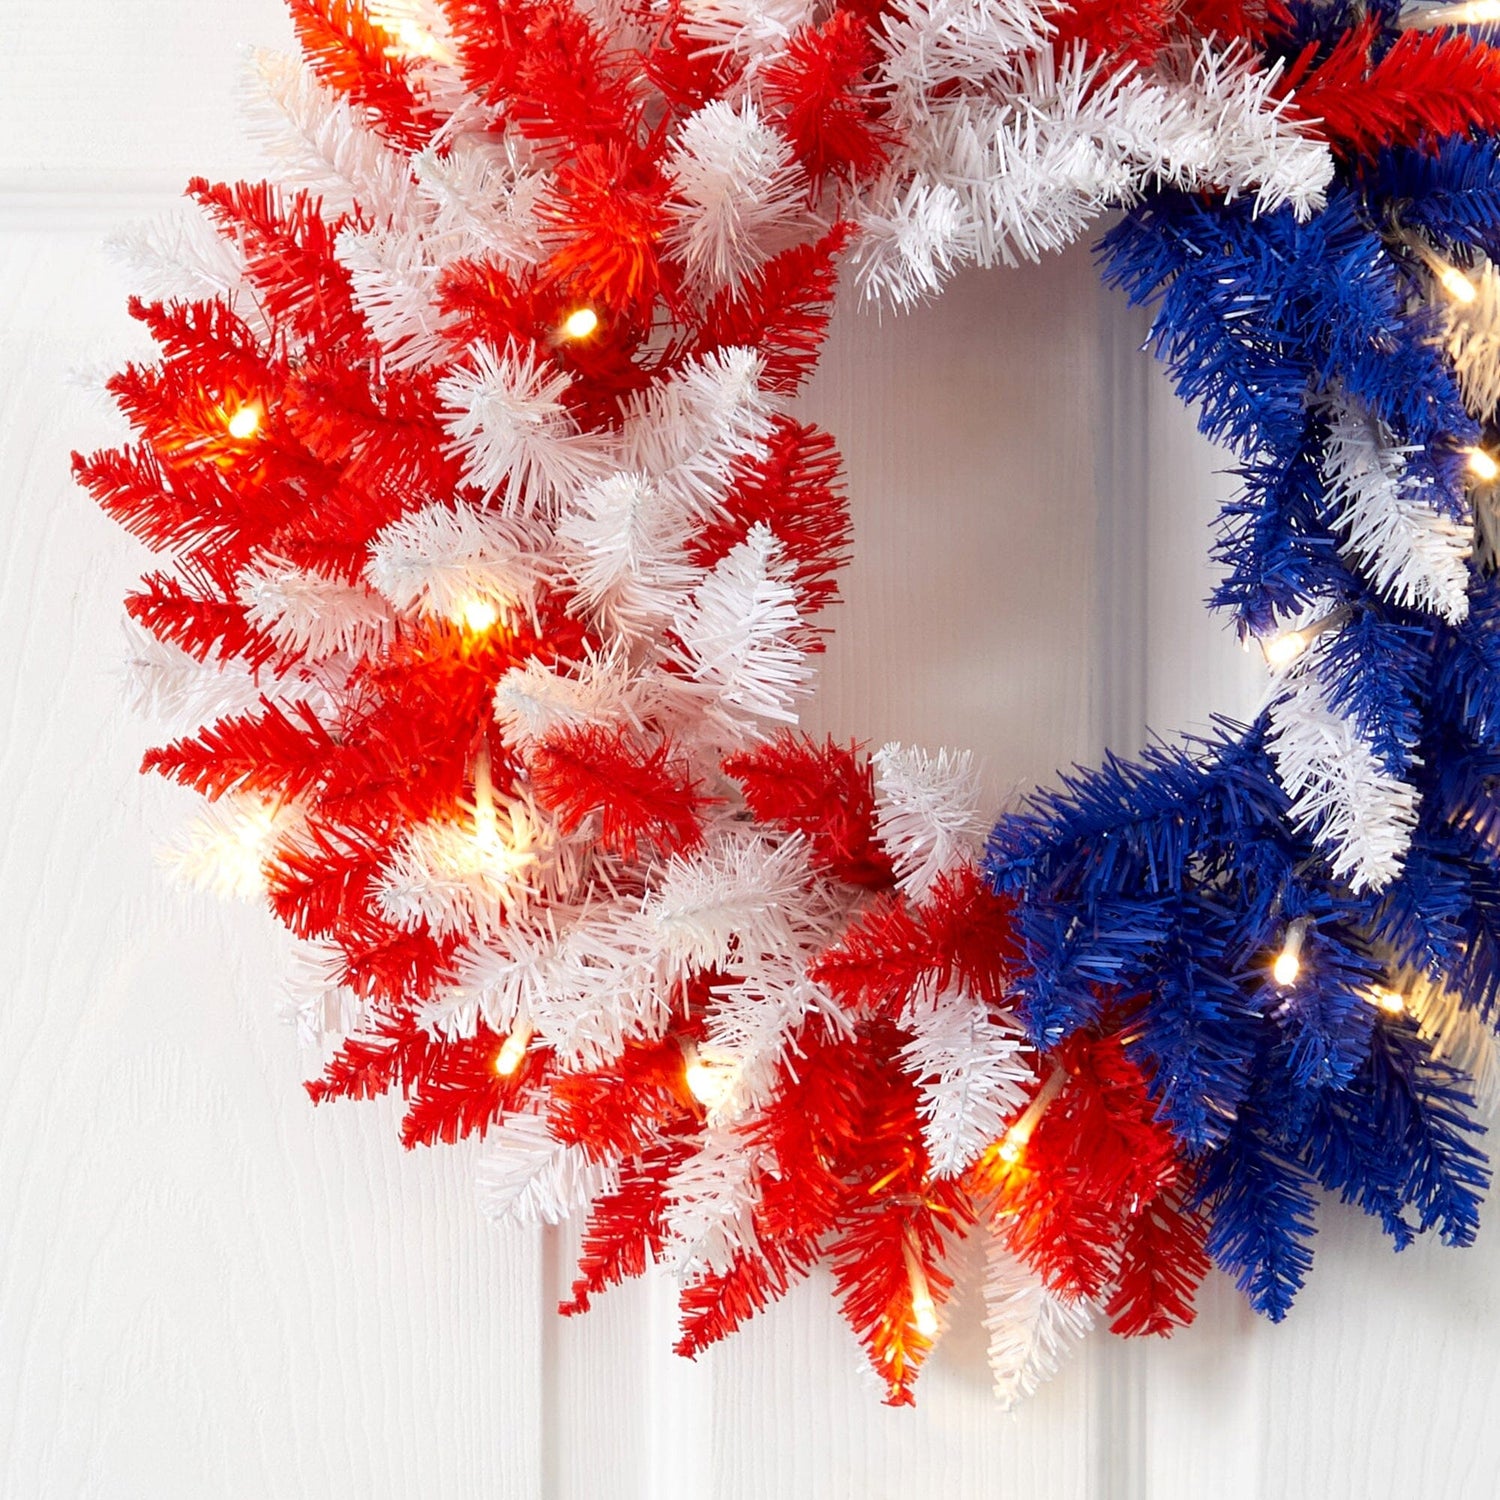 18” Patriotic Red, White and Blue “Americana” Wreath with 20 Warm LED Lights